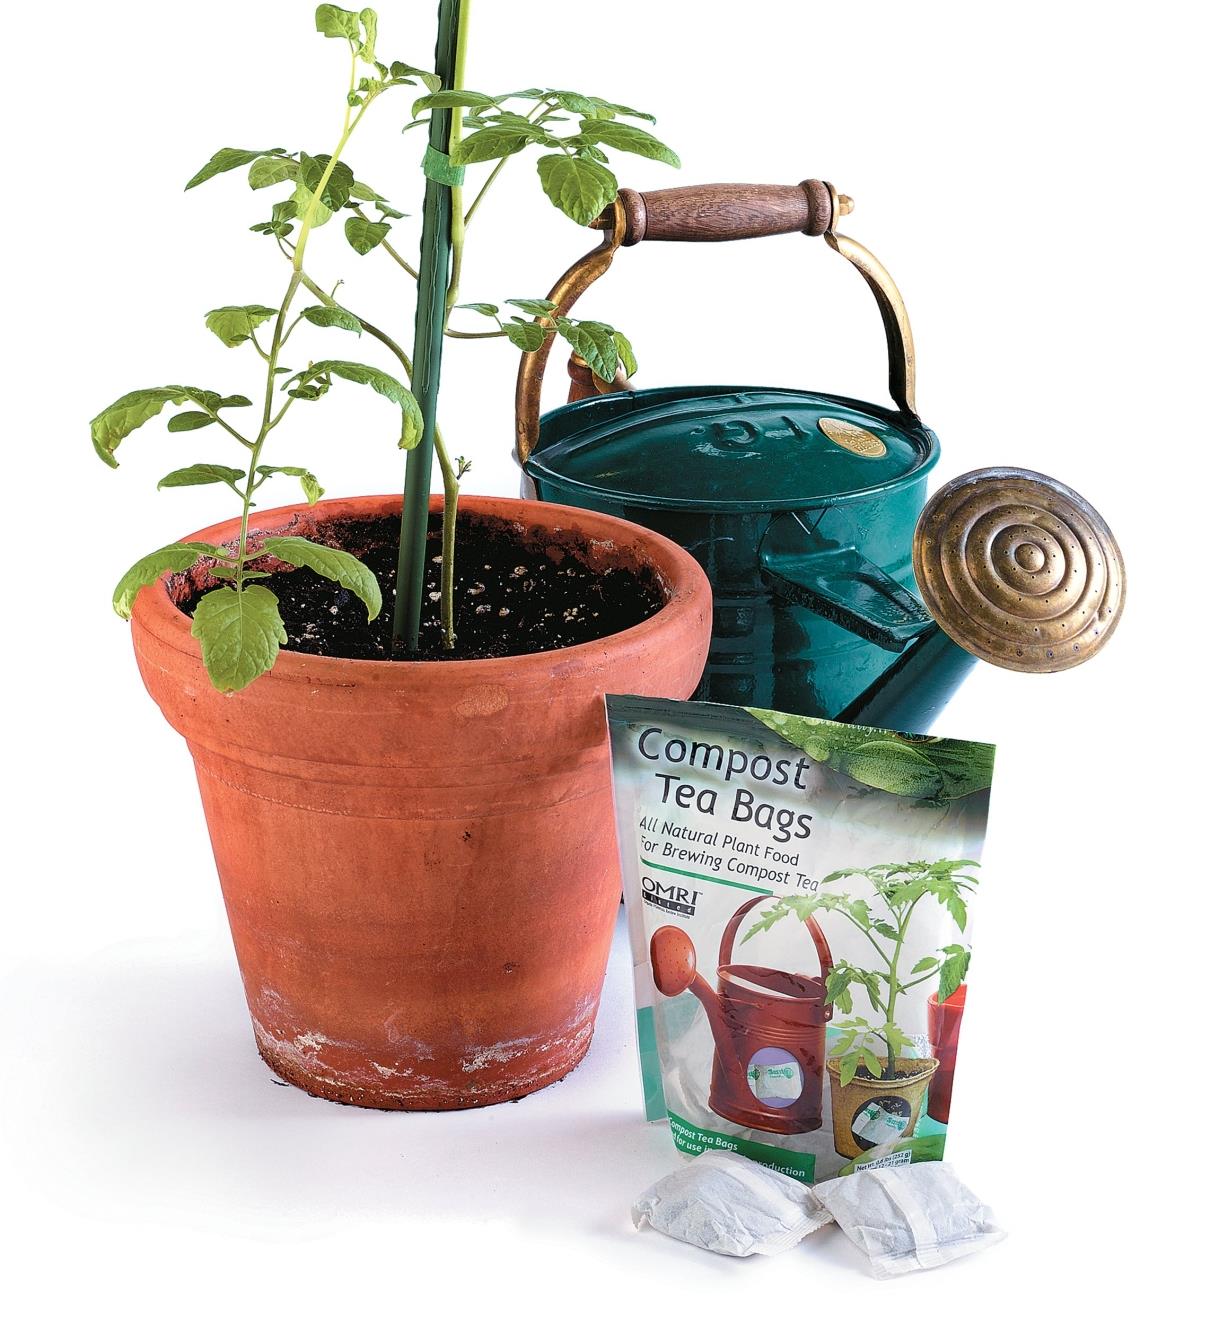 Package of Compost Tea Bags next to a potted plant and a watering can